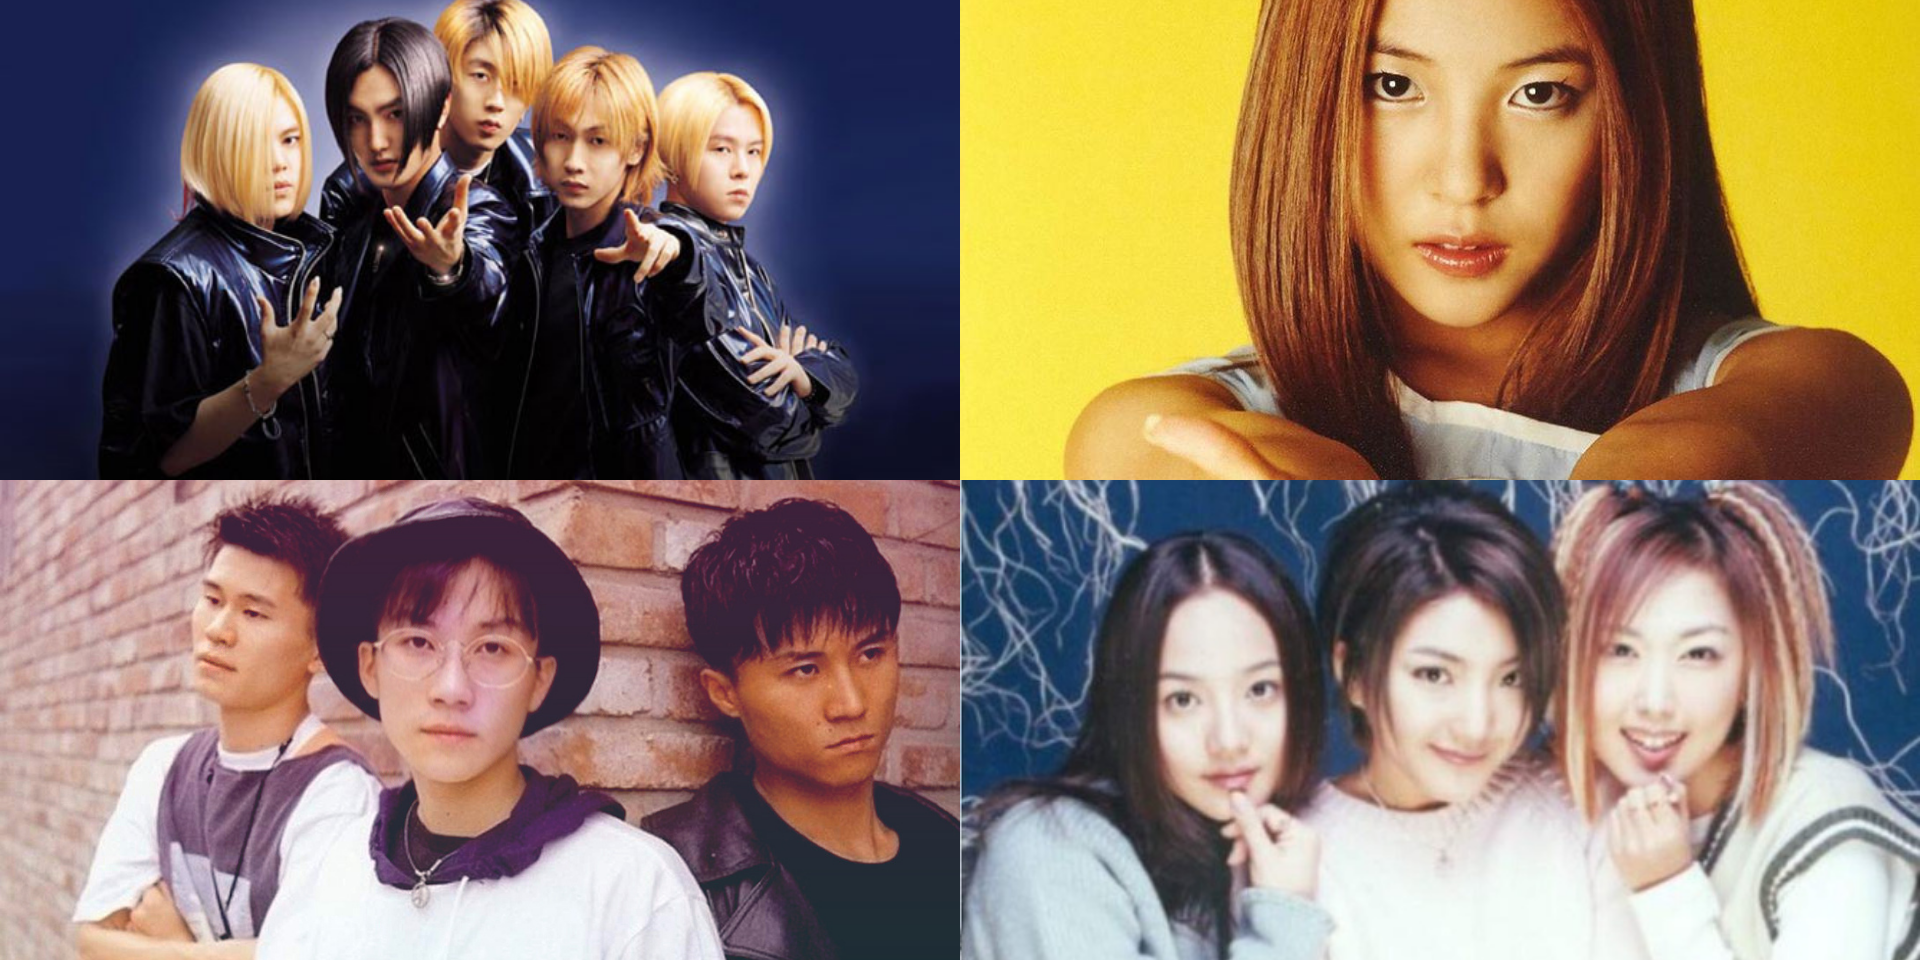 Bandwagon's guide K-pop pioneers: Taiji Boys, H.O.T., BoA, SES, and more |